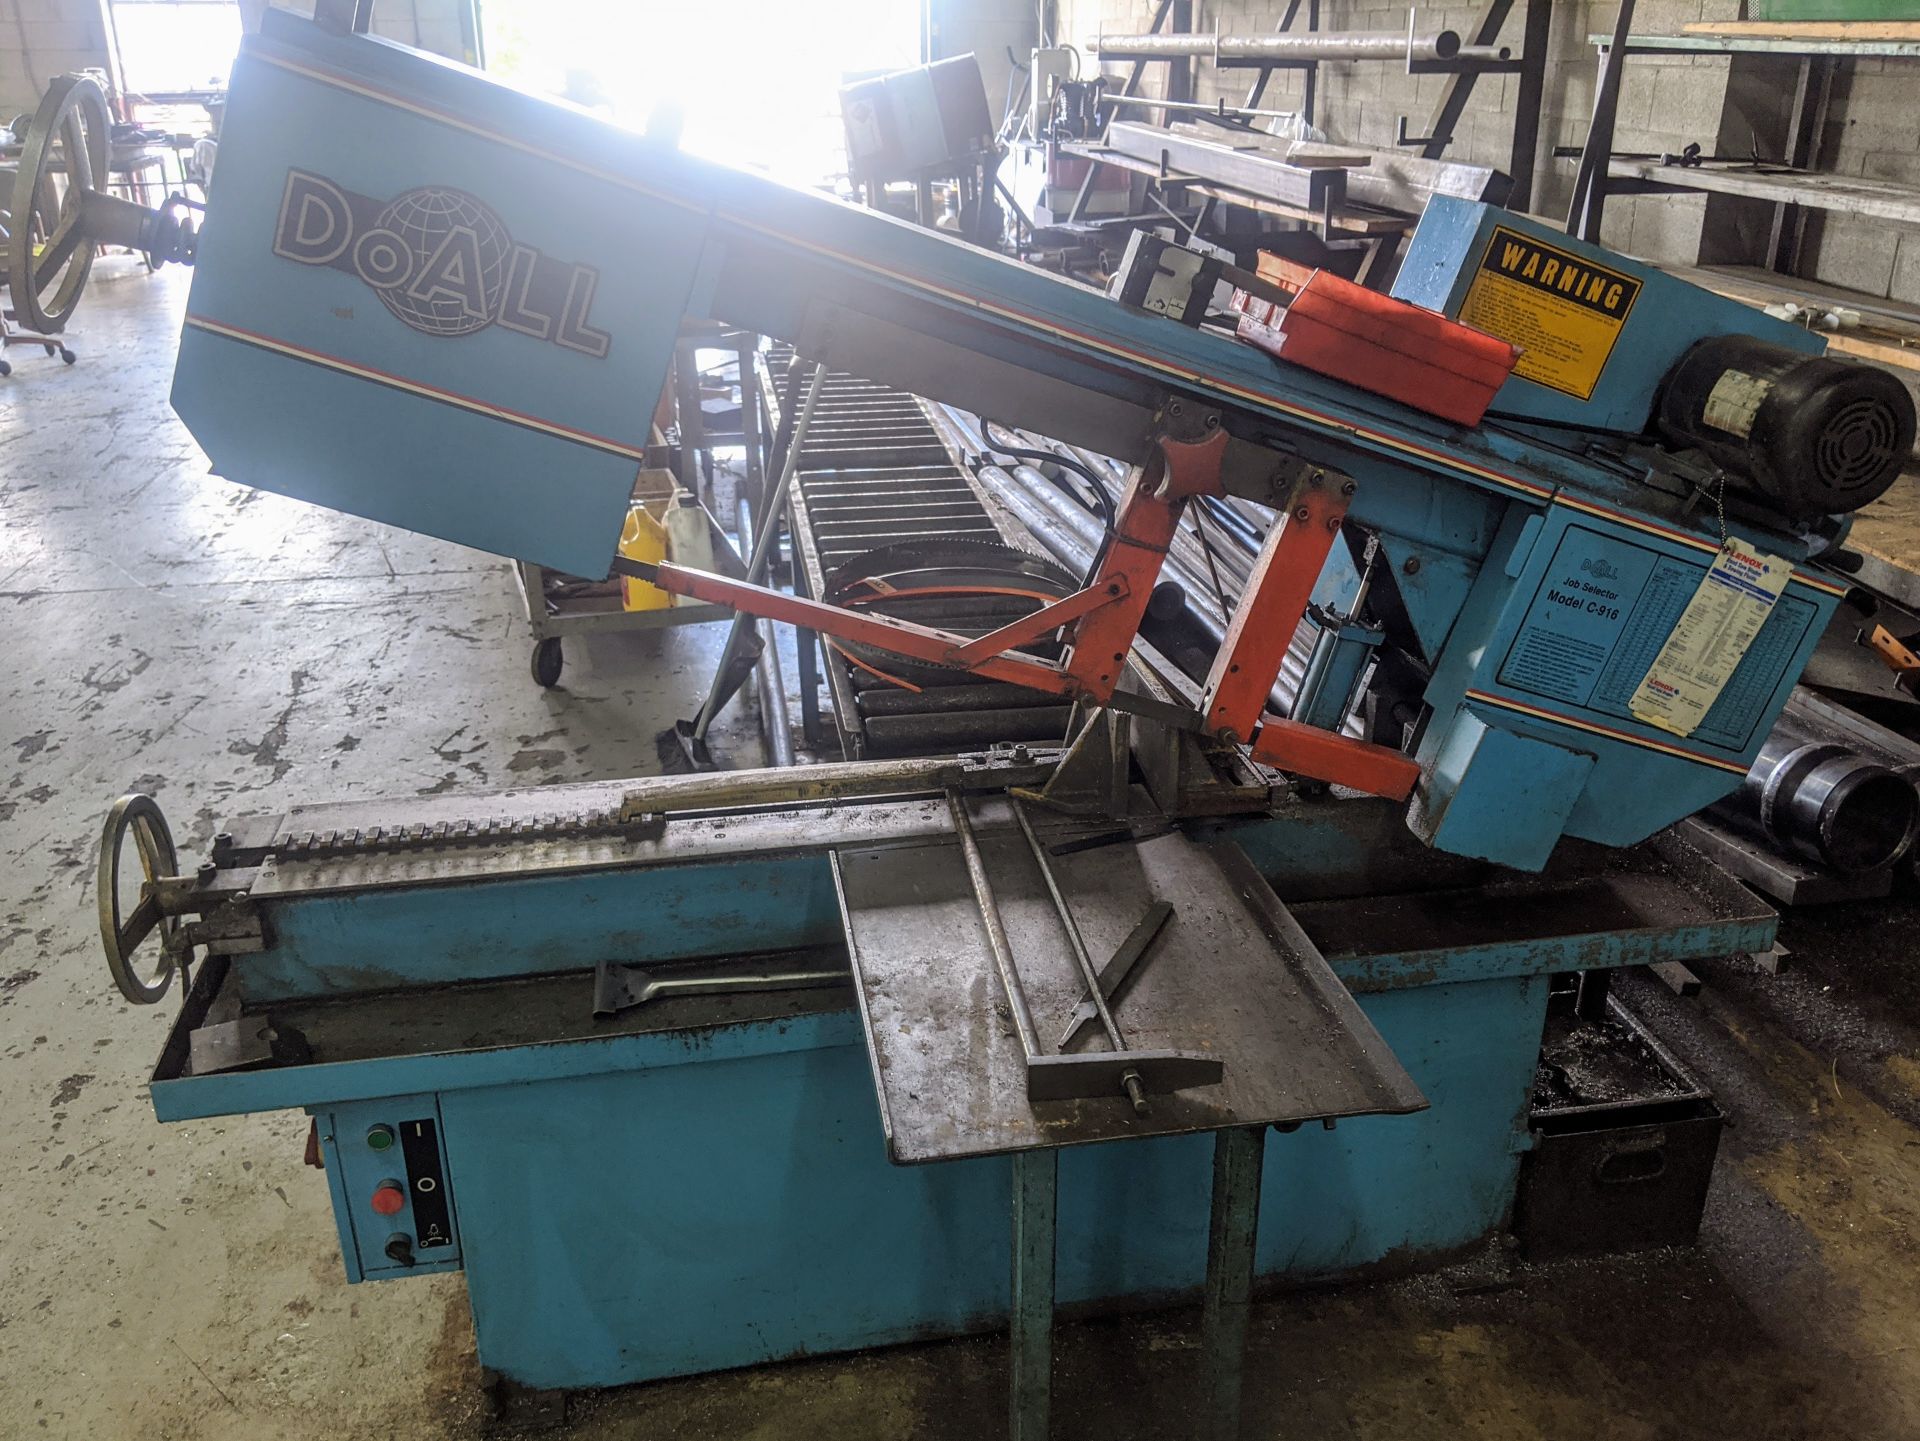 DO-ALL C-916 HORIZONTAL BANDSAW, S/N 470-89611 W/ 10' CONVEYOR AND (2) EXTRA BLADES - Image 2 of 8